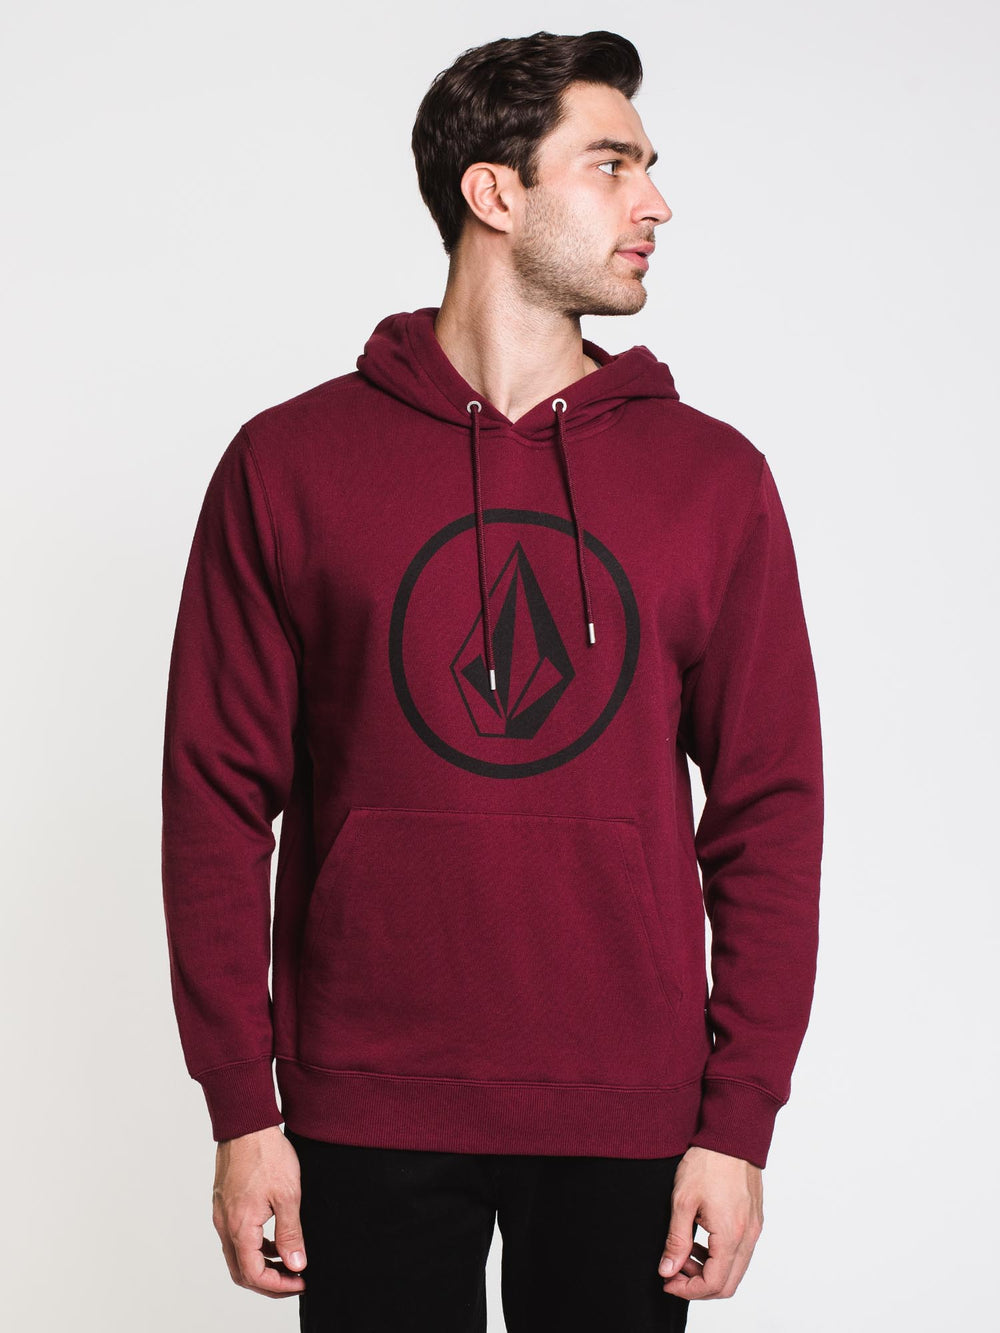 MENS STONE PULLOVER HOOD - PORT - CLEARANCE